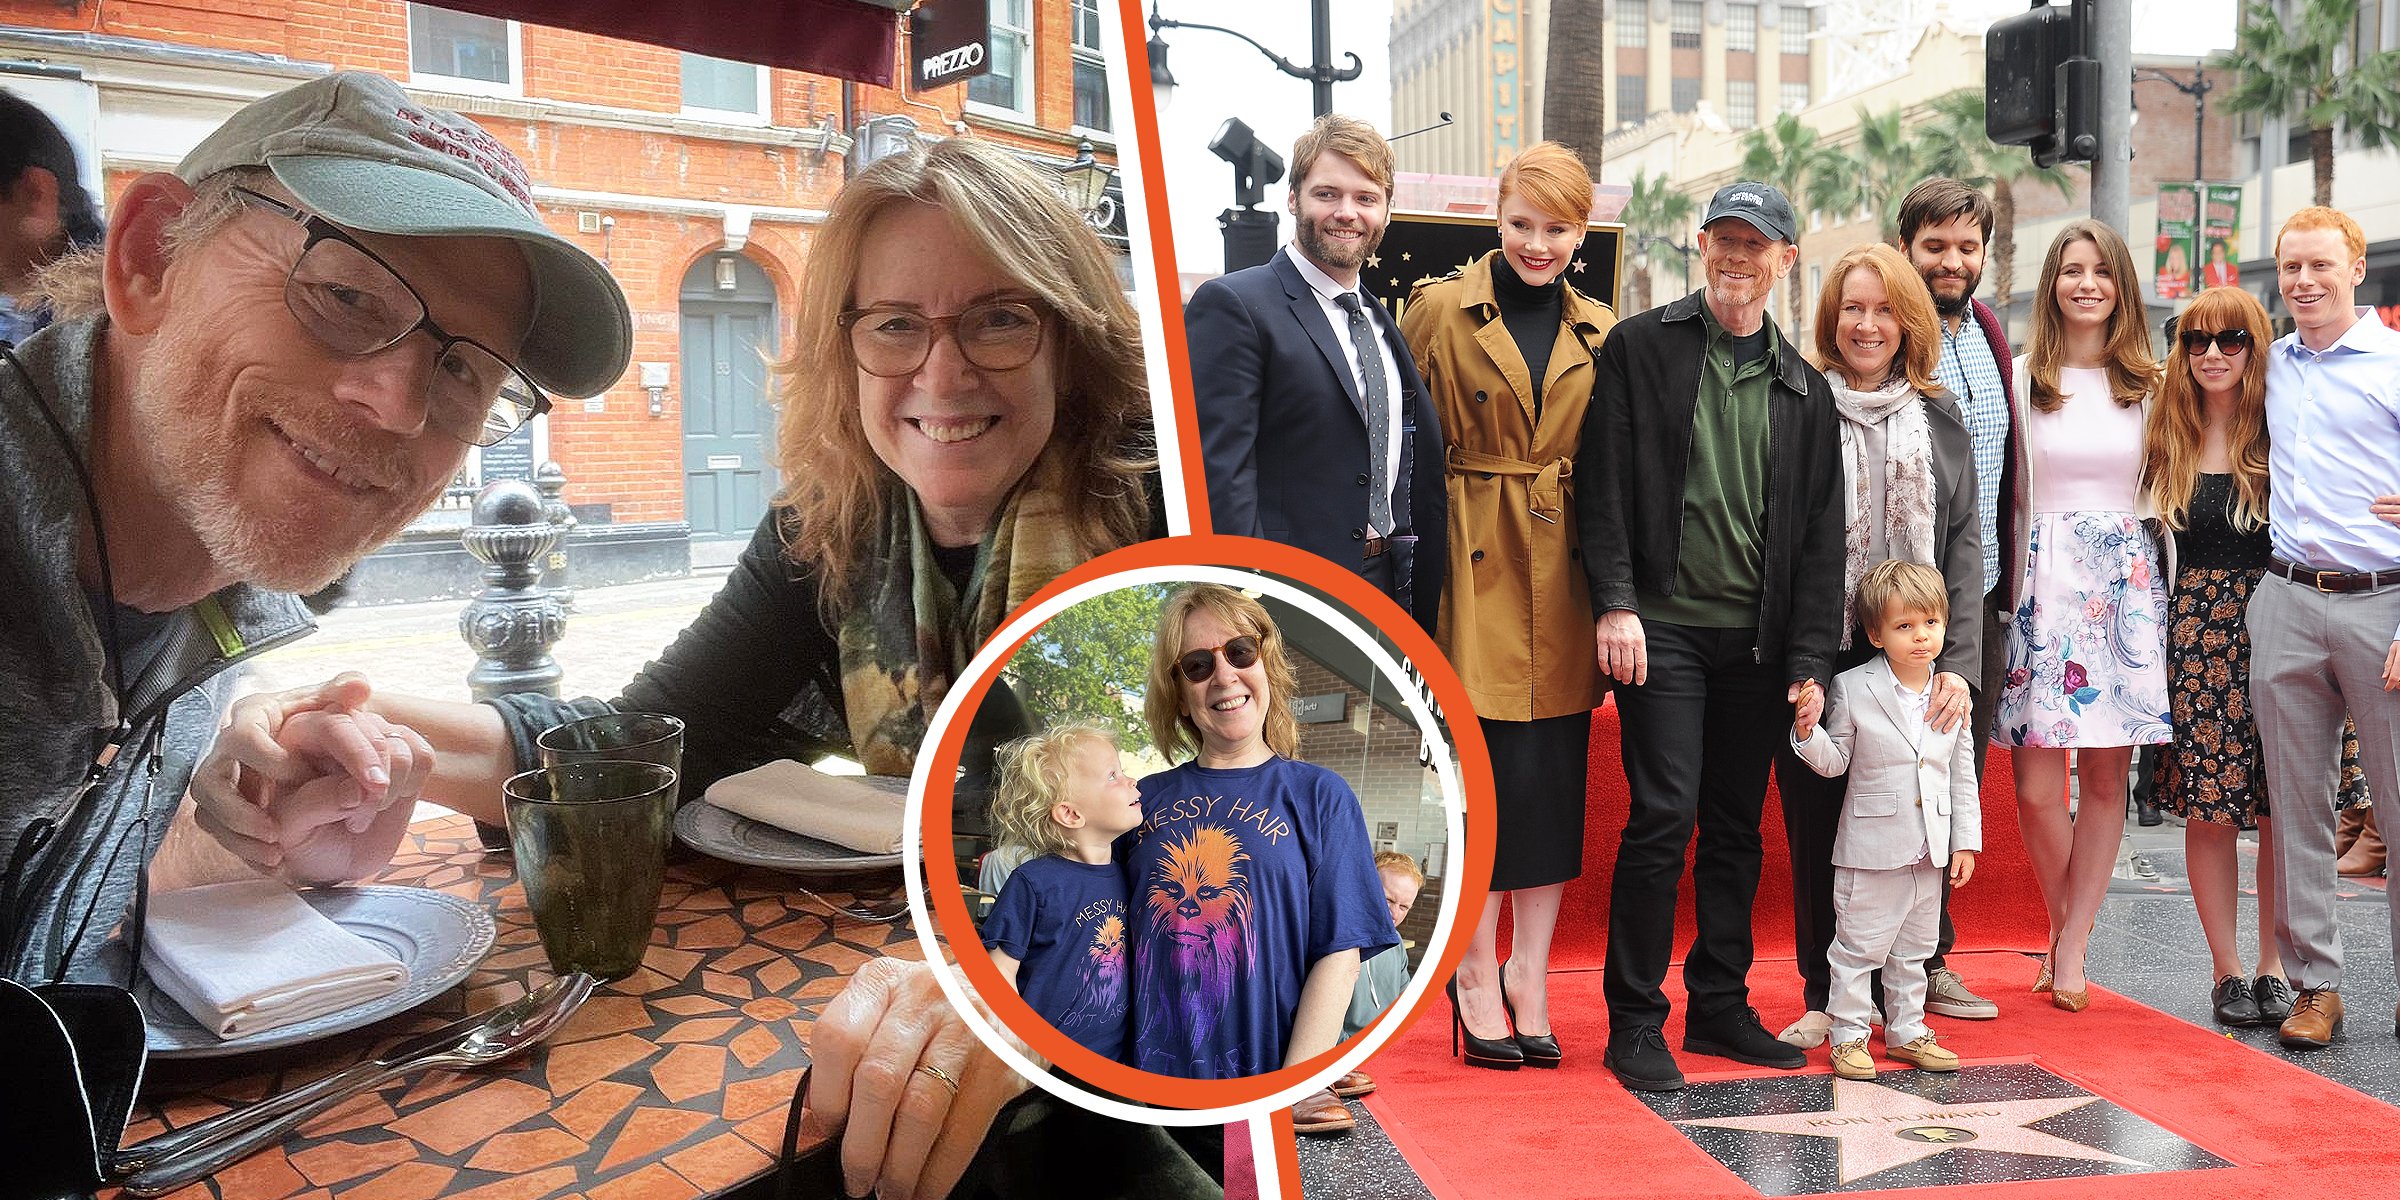 Ron Howard and Cheryl Howard [L] | Cheryl Howard and her grandson [Inset] | Ron Howard and family [Right] | Source: Gettty Images | Instagram.com/realronhoward 